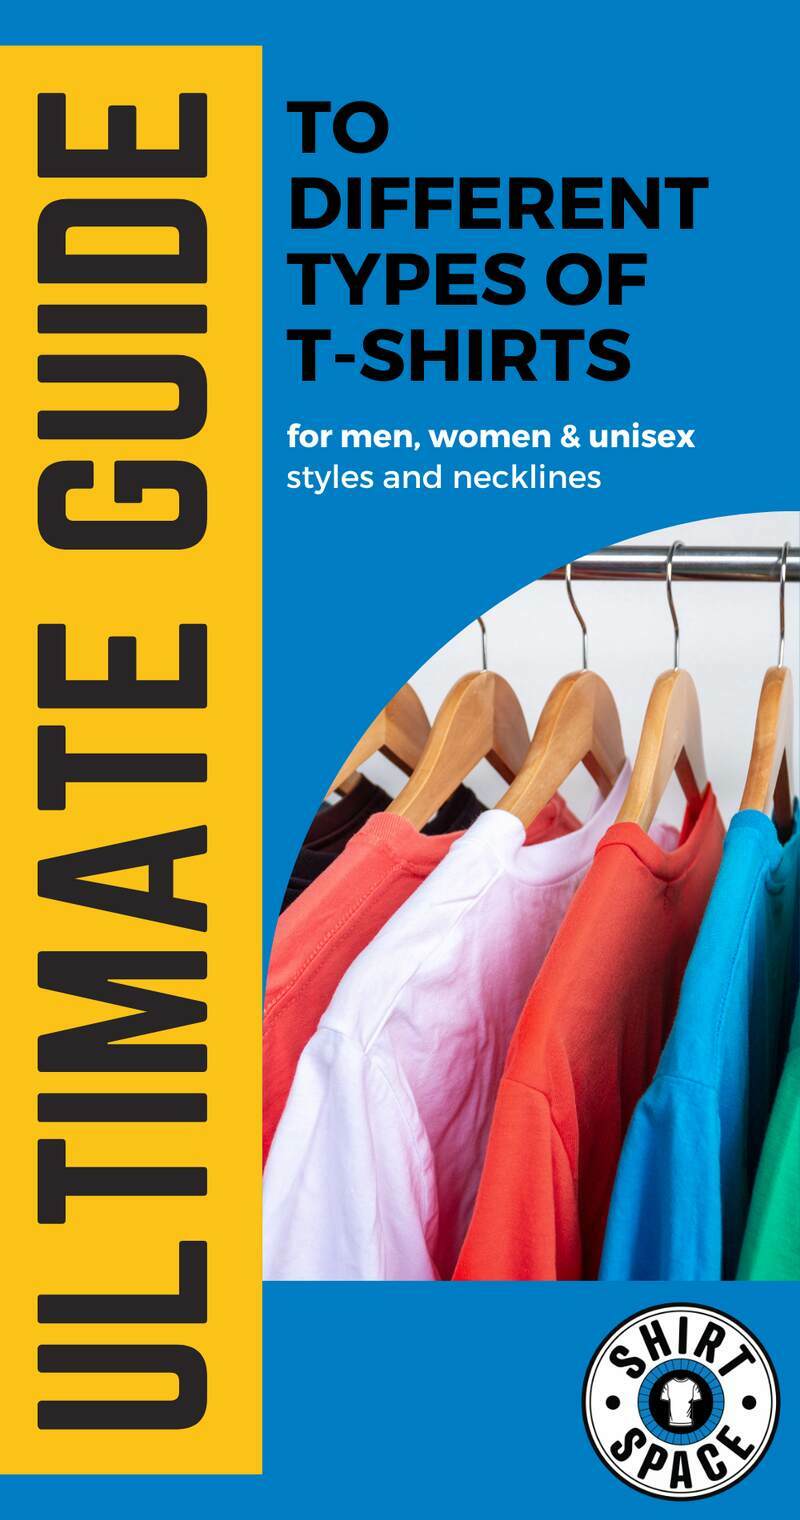 Pinterest pin promoting ShirtSpace's Ultimate Guide To Different Types of T-Shirts for men, women, and unisex styles and necklines.